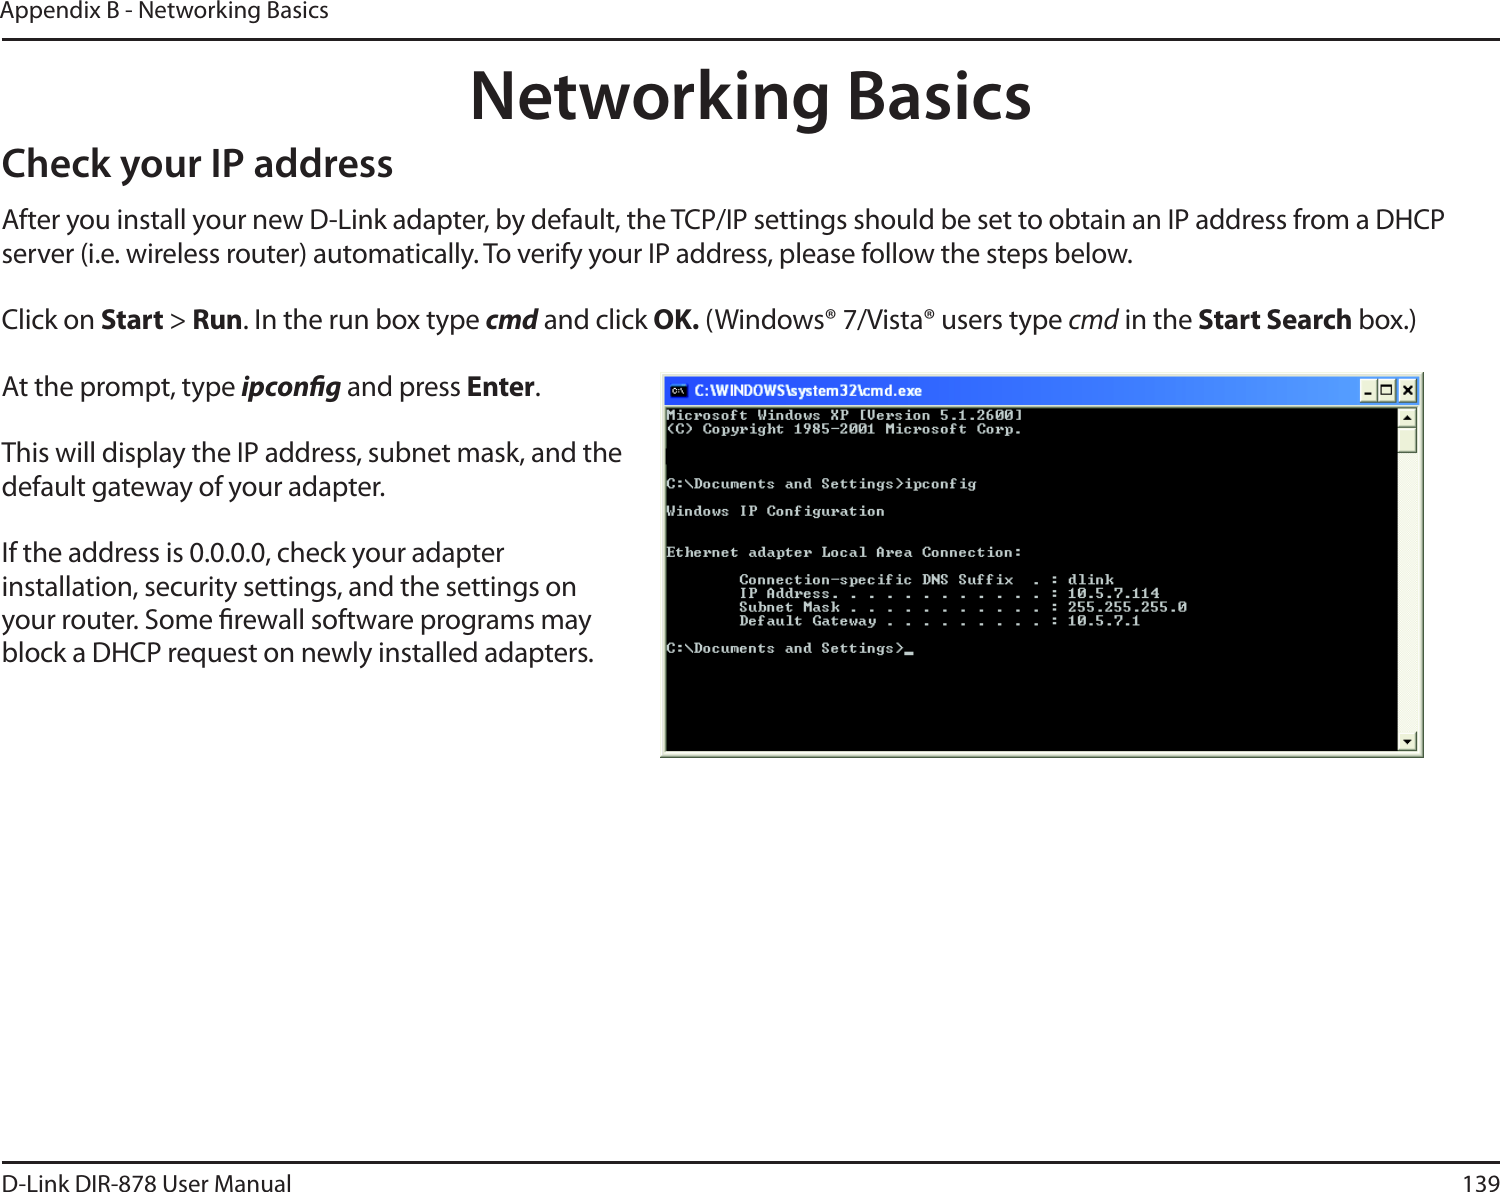 139D-Link DIR-878 User ManualAppendix B - Networking BasicsNetworking BasicsCheck your IP addressAfter you install your new D-Link adapter, by default, the TCP/IP settings should be set to obtain an IP address from a DHCP server (i.e. wireless router) automatically. To verify your IP address, please follow the steps below.Click on Start &gt; Run. In the run box type cmd and click OK. (Windows® 7/Vista® users type cmd in the Start Search box.)At the prompt, type ipcong and press &amp;OUFS.This will display the IP address, subnet mask, and the default gateway of your adapter.If the address is 0.0.0.0, check your adapter installation, security settings, and the settings on your router. Some rewall software programs may block a DHCP request on newly installed adapters. 